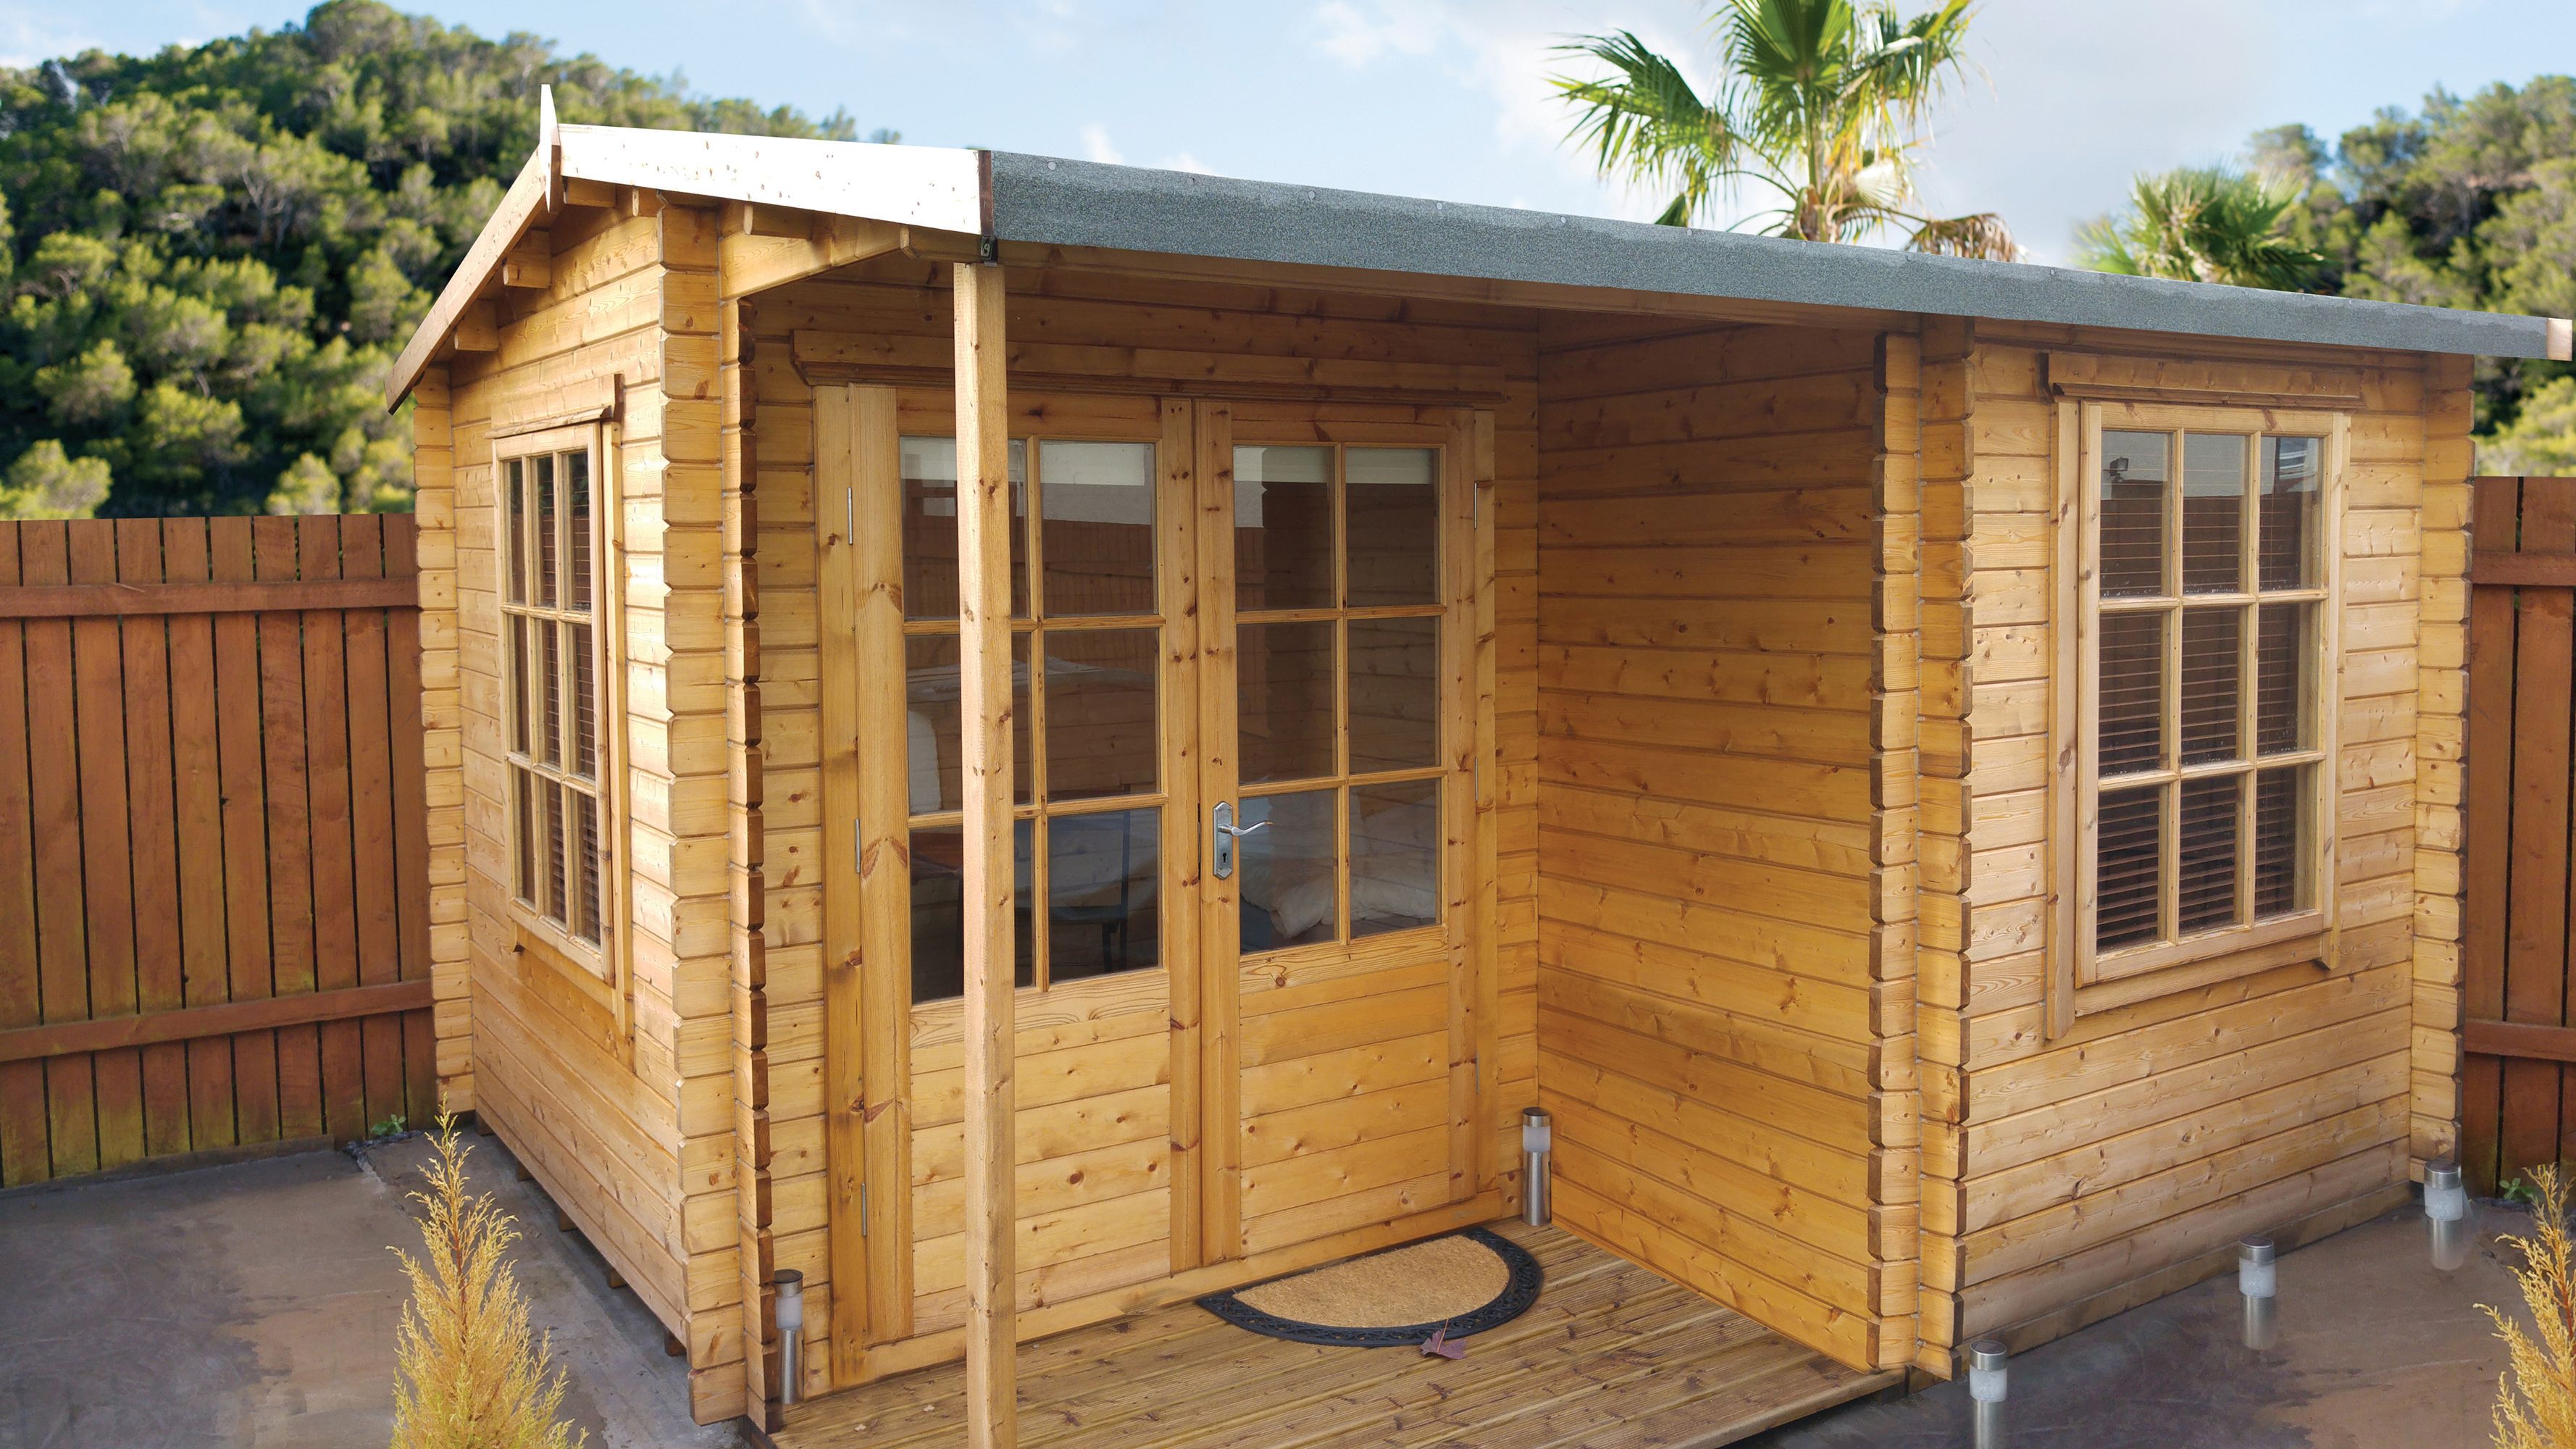 Image of Shire Ringwood 12 x 18ft Double Door Log Cabin including Covered Porch